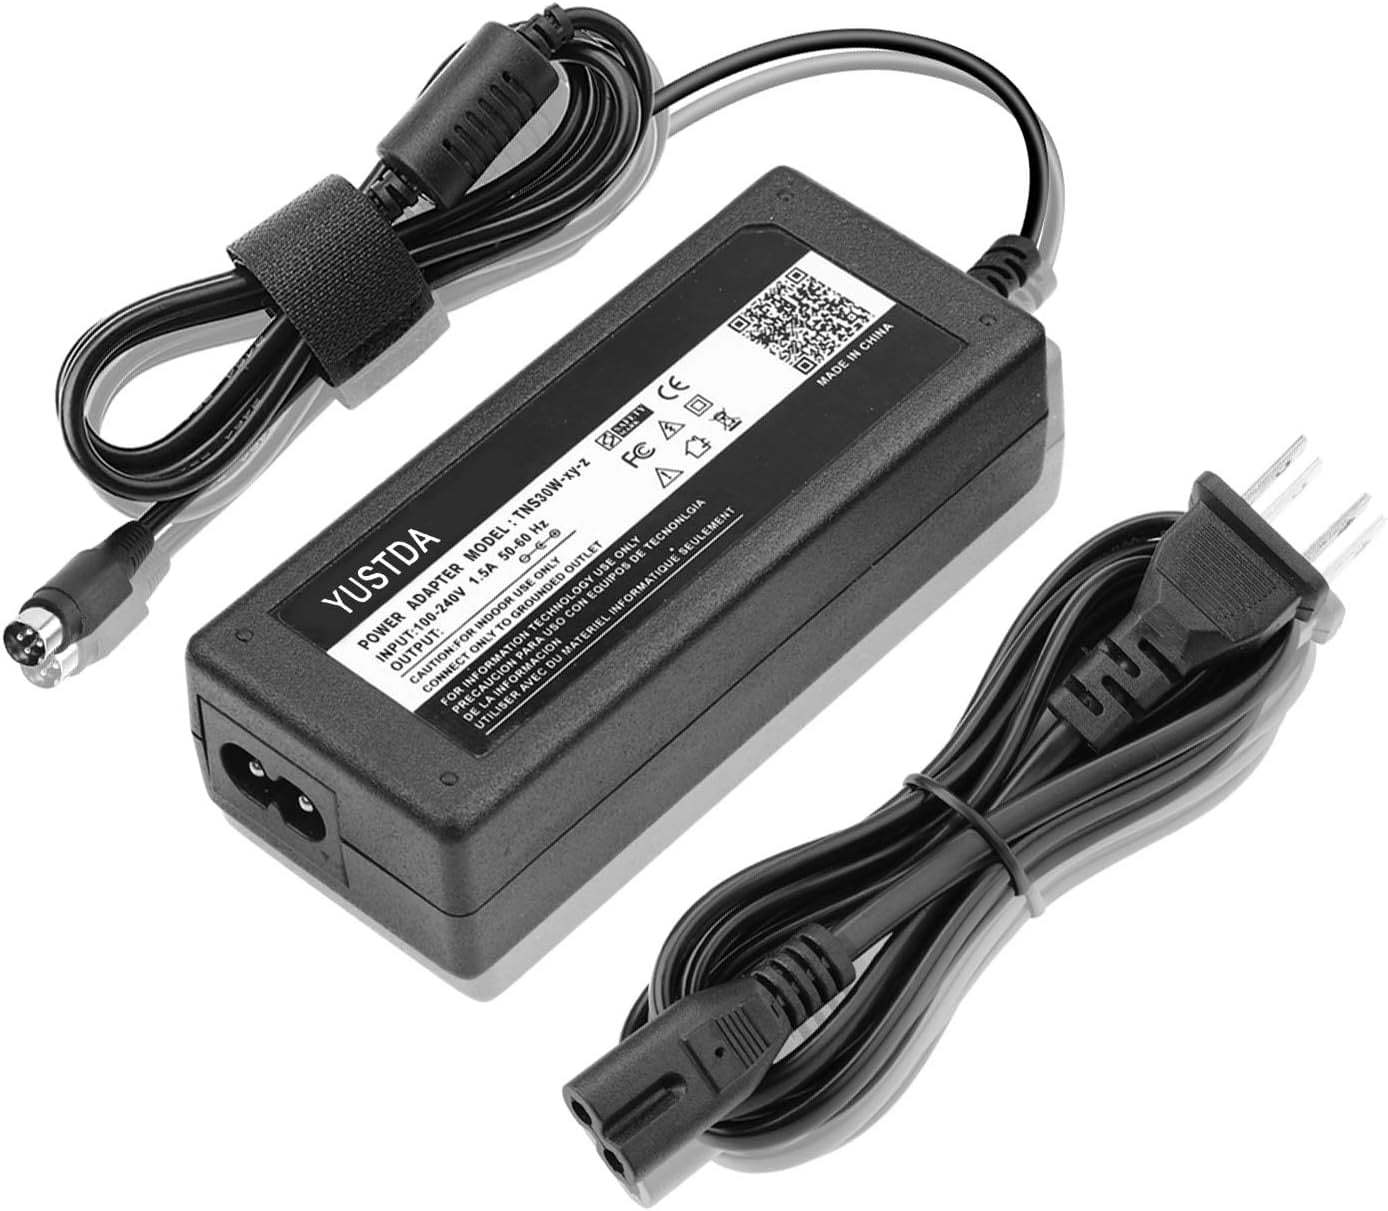 Yustda 4Pin and Barrel Plug 48V AC/DC Adapter Replacement for CS